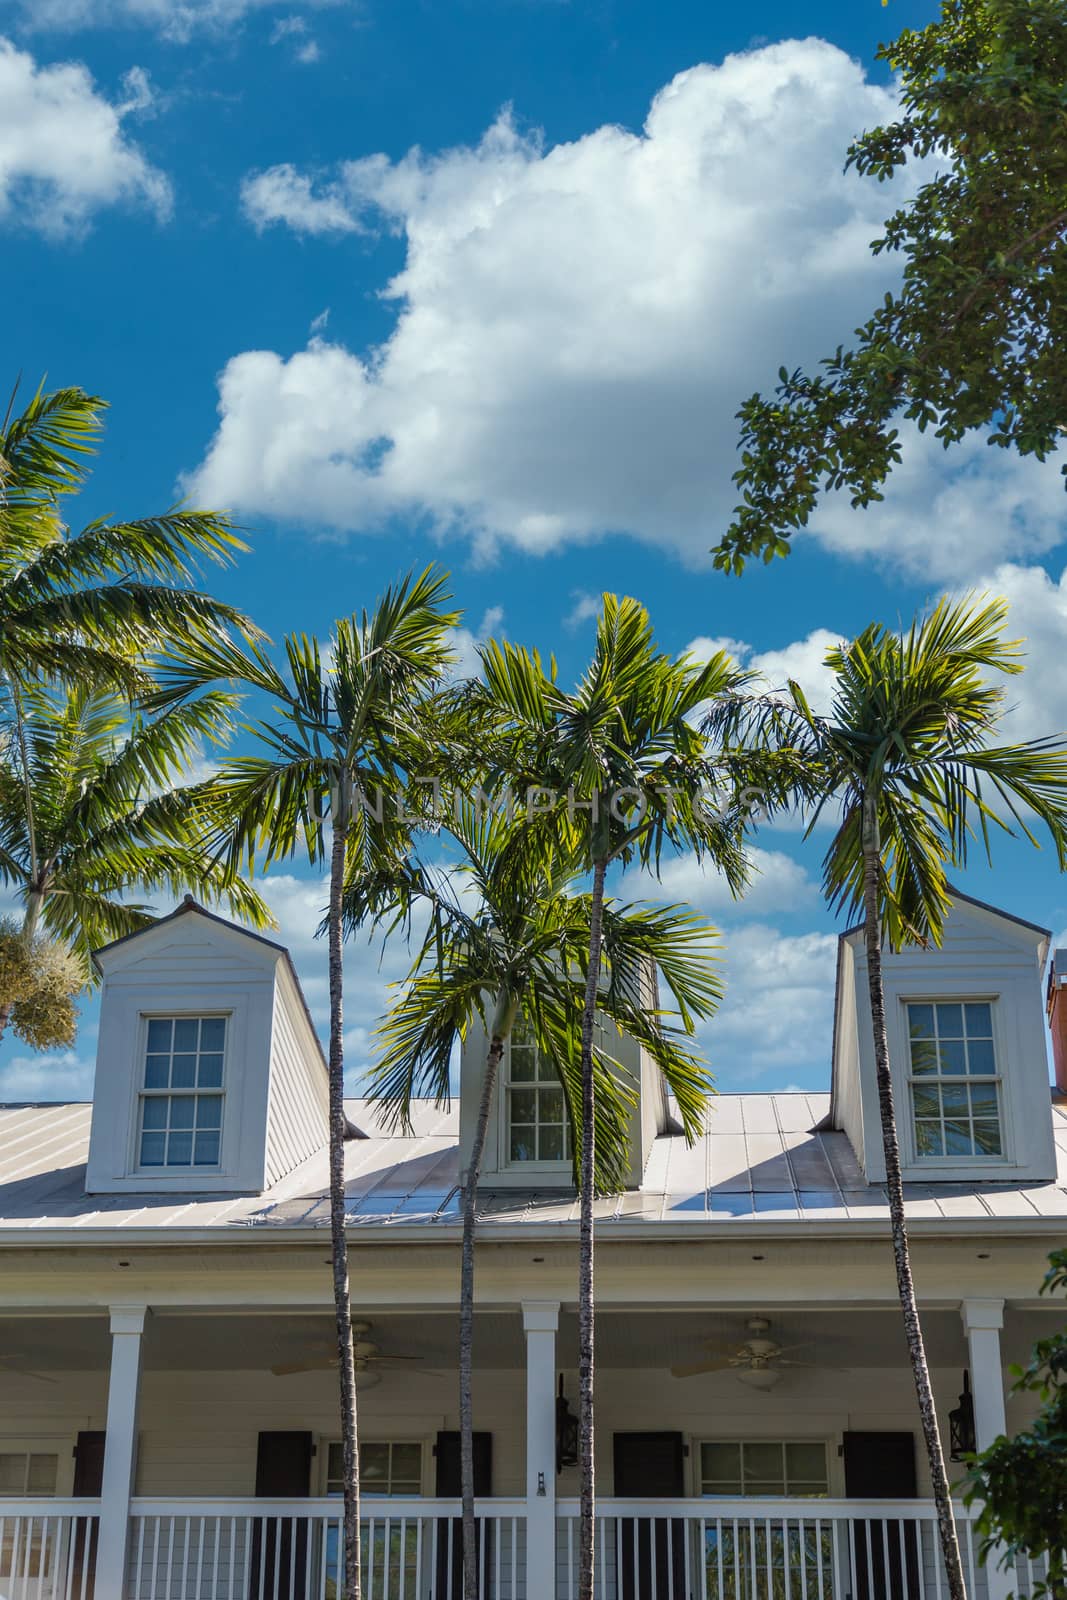 Dormers Behind Palm Trees by dbvirago